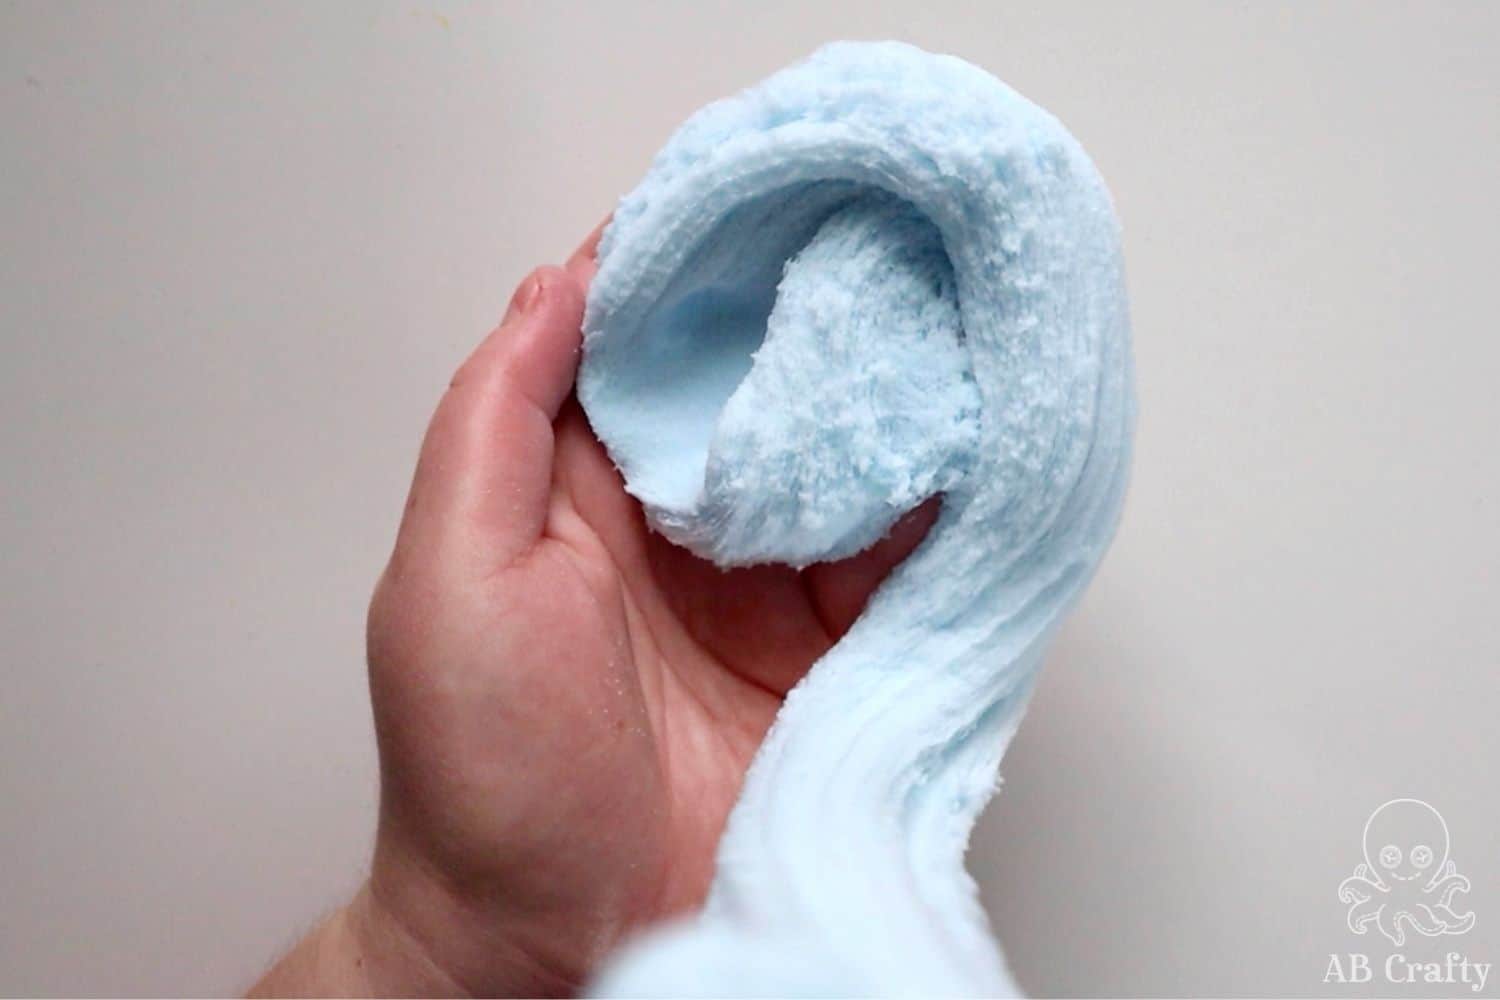 Cloud Slime - How to Easily Make Fluffy Cloud Slime - AB Crafty